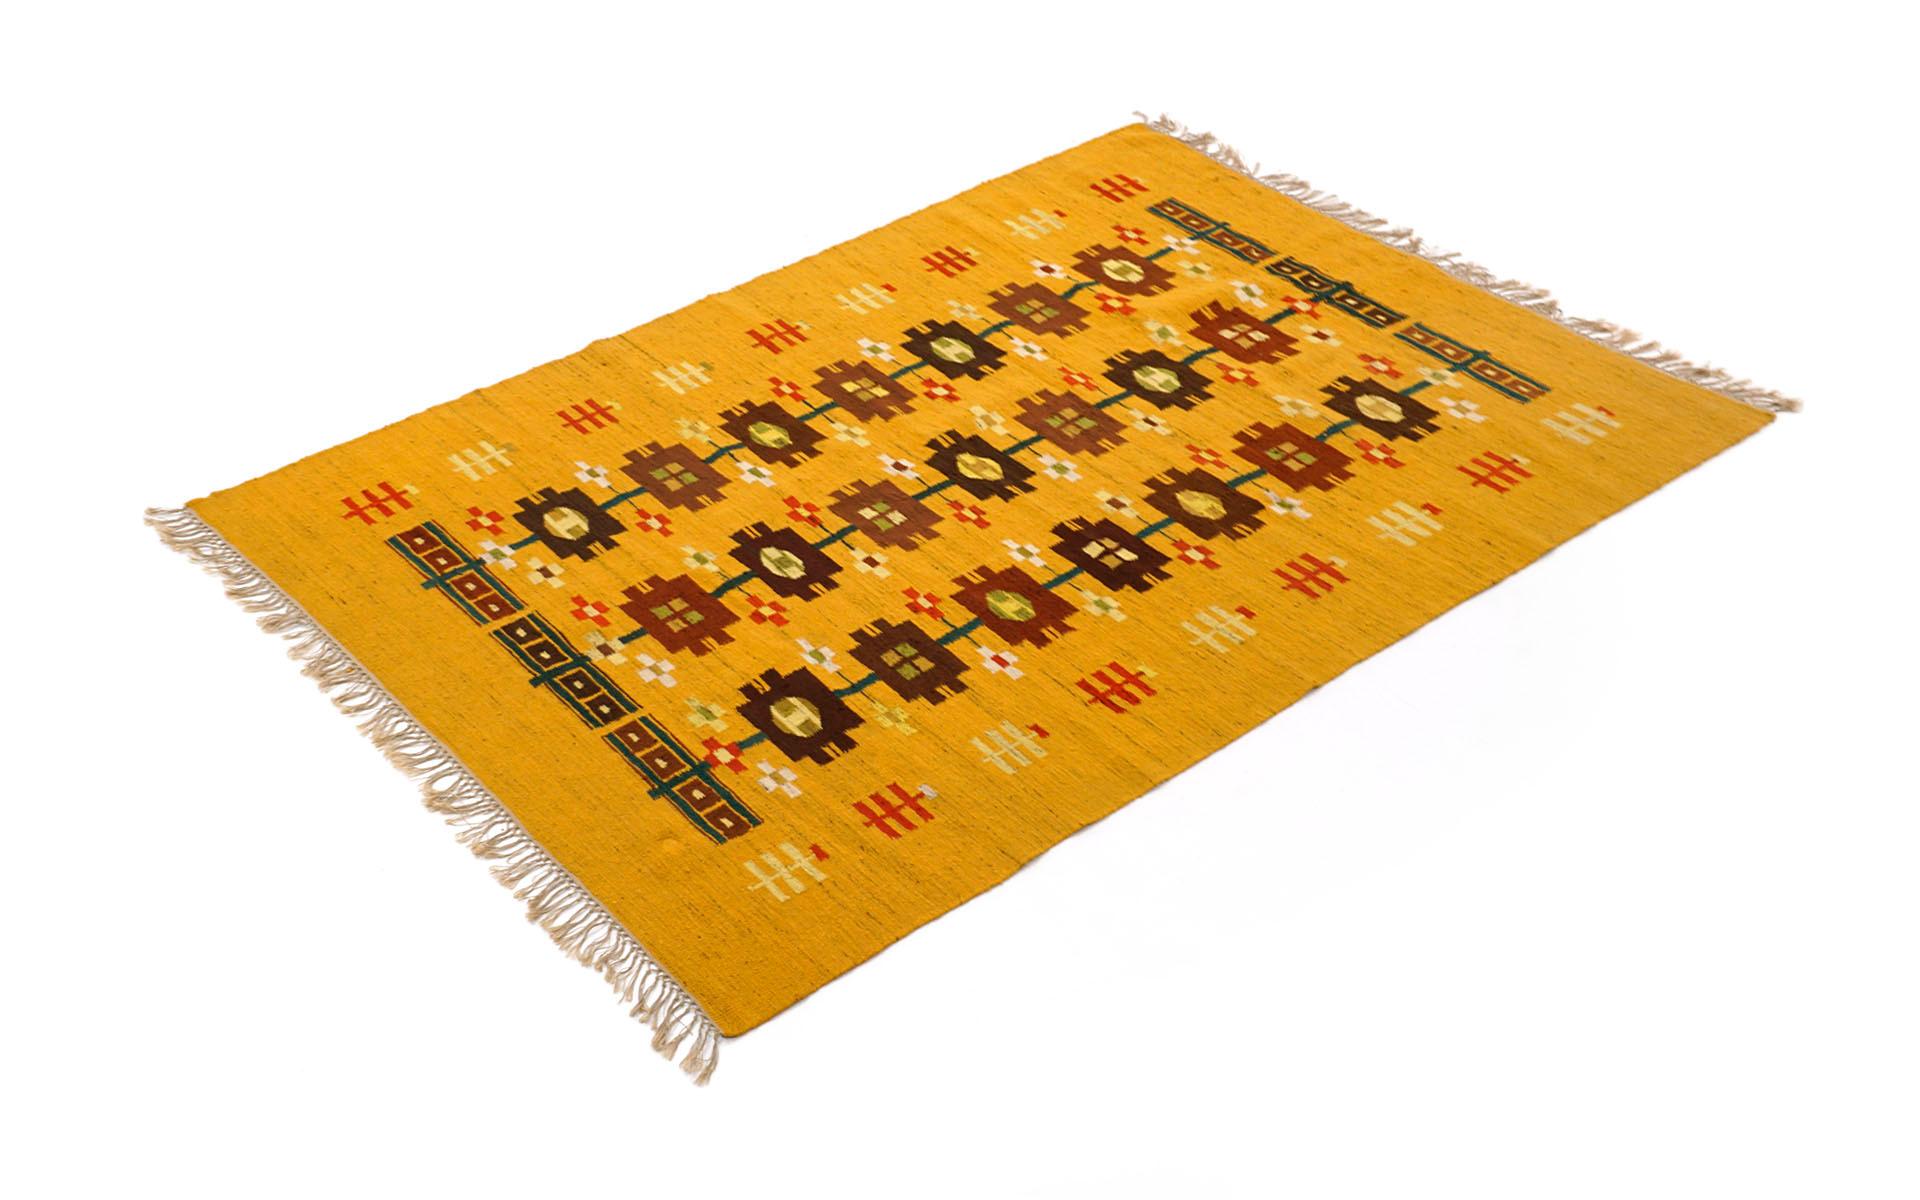 Handwoven tapestry / rug designed by Rumiany Sznajder for Cepelia, Poland, 1970s. The condition is excellent with no signs that this has ever been used as a rug. Beautiful colors of yellow, mustard, reds, browns and more.